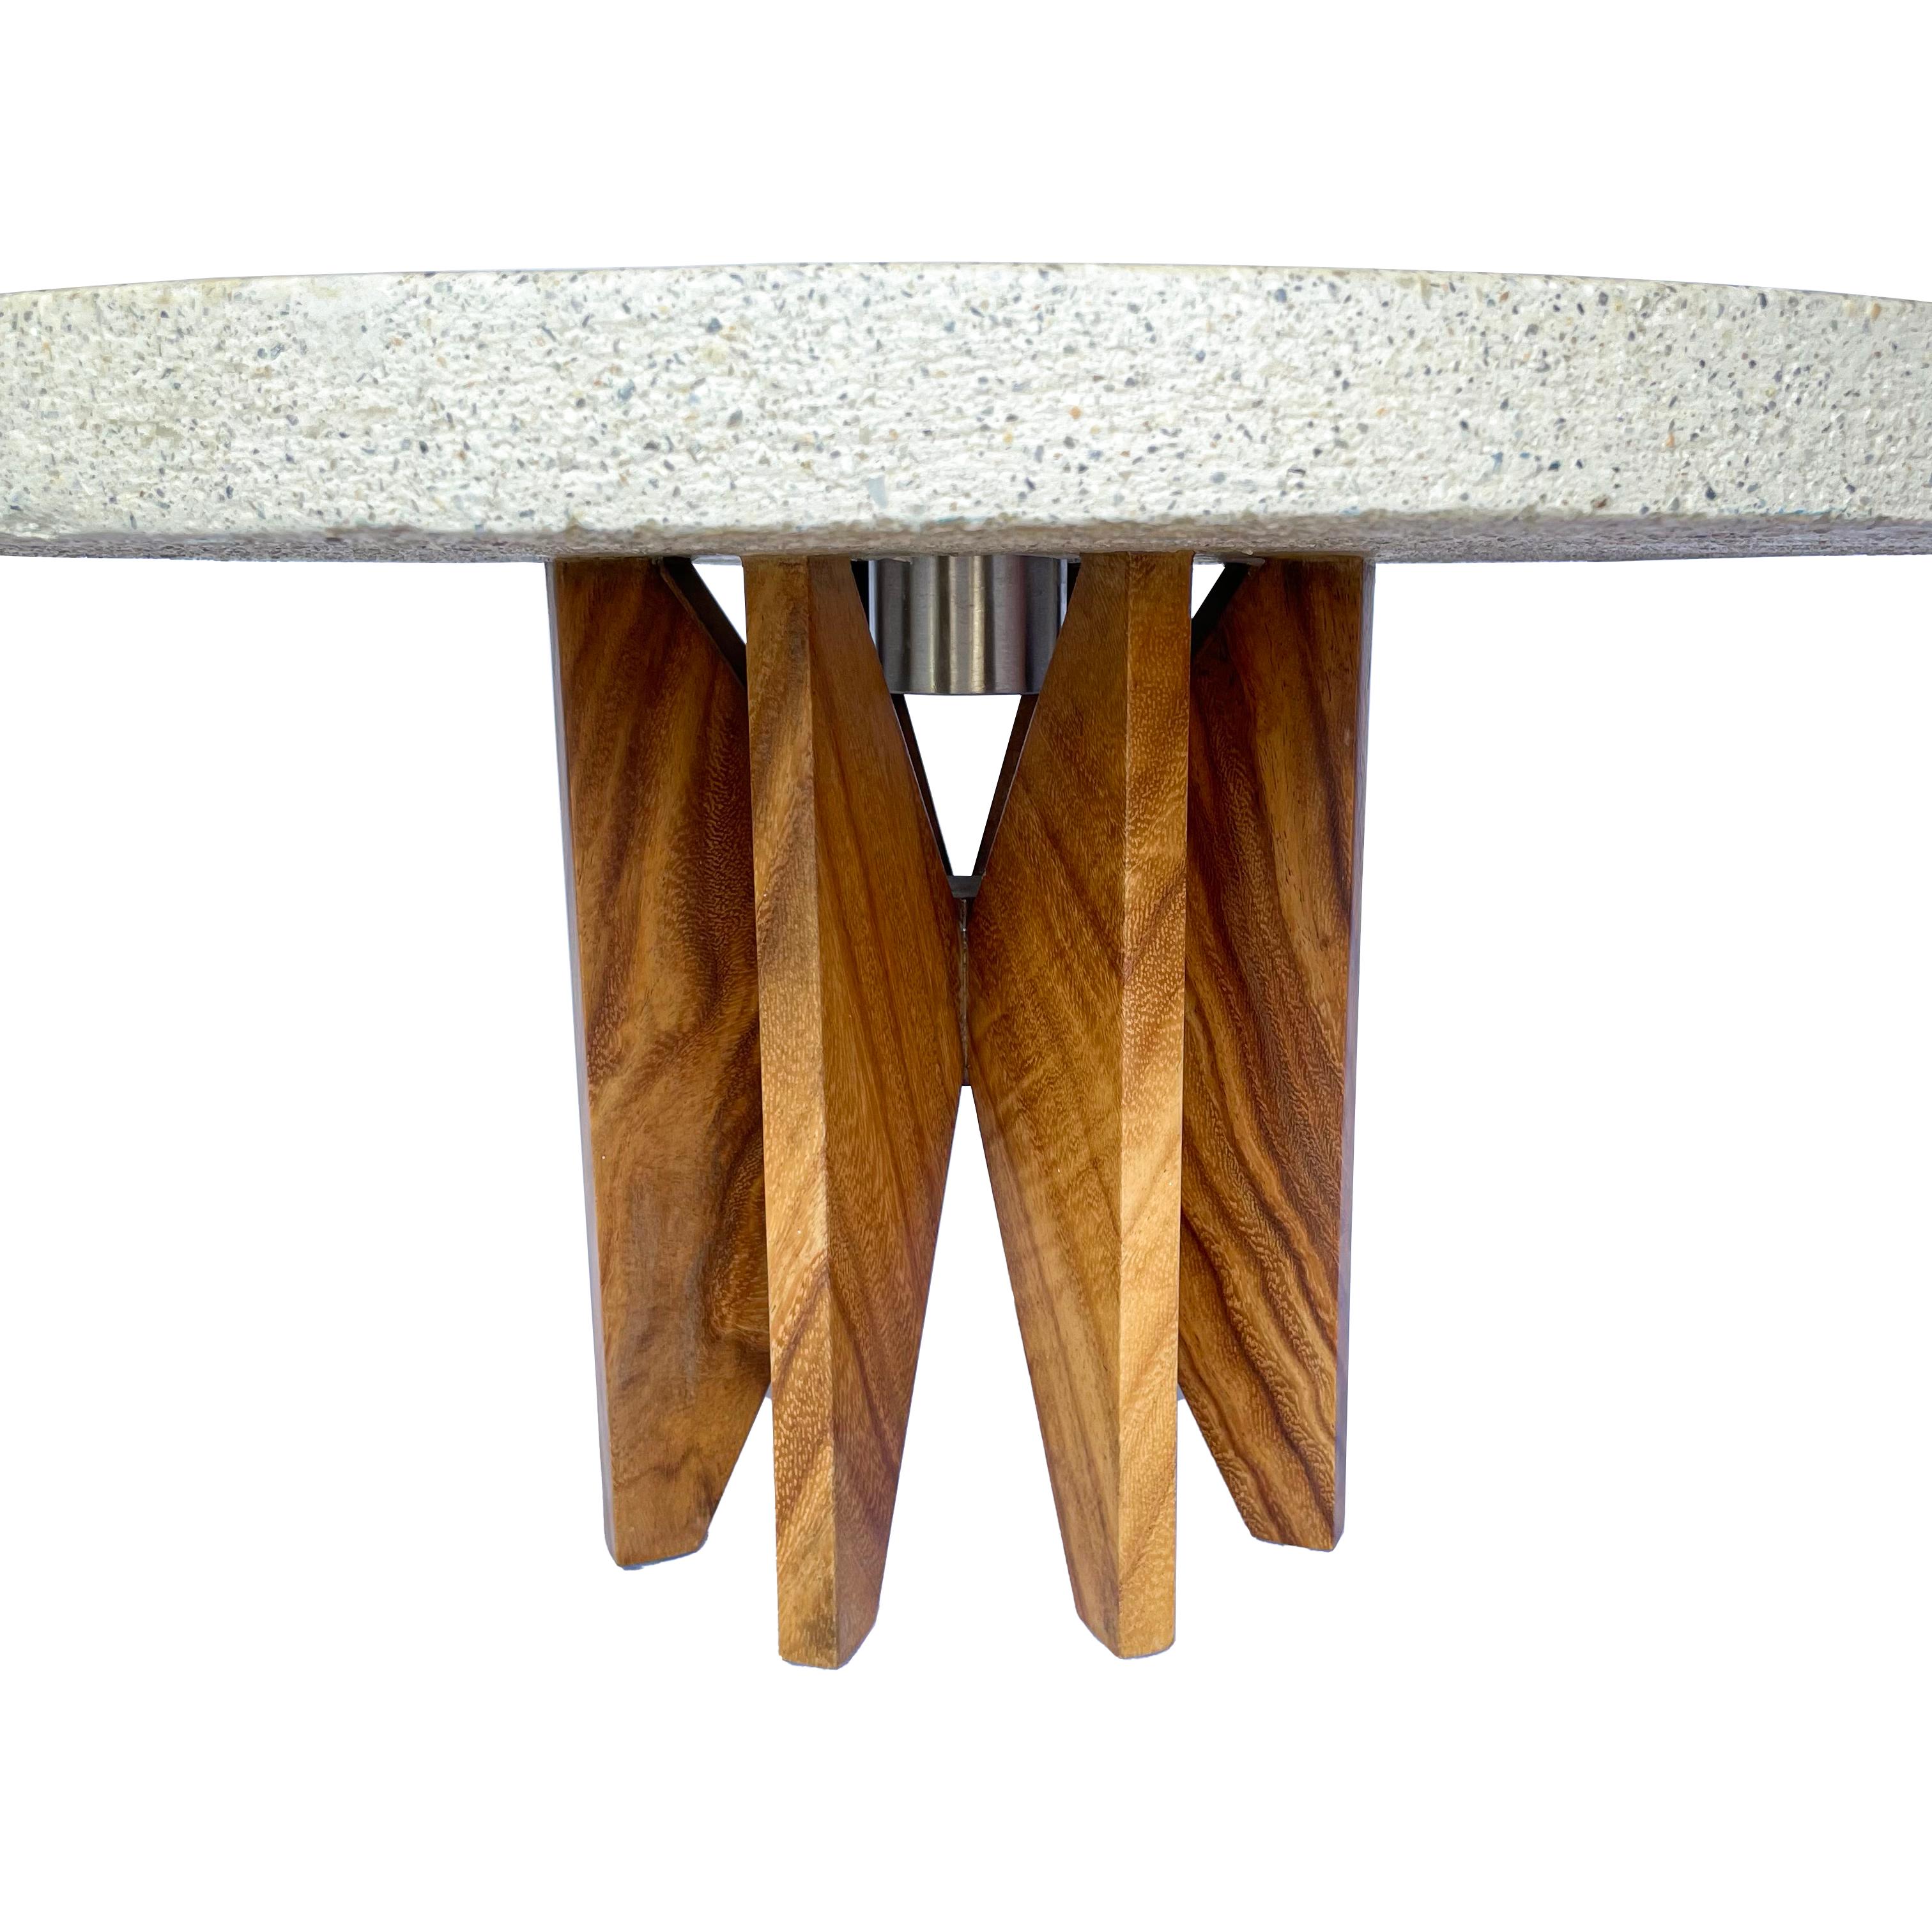 Hand-Crafted Modern Wood and Concrete Fire Table top by Pierre Sarkis For Sale